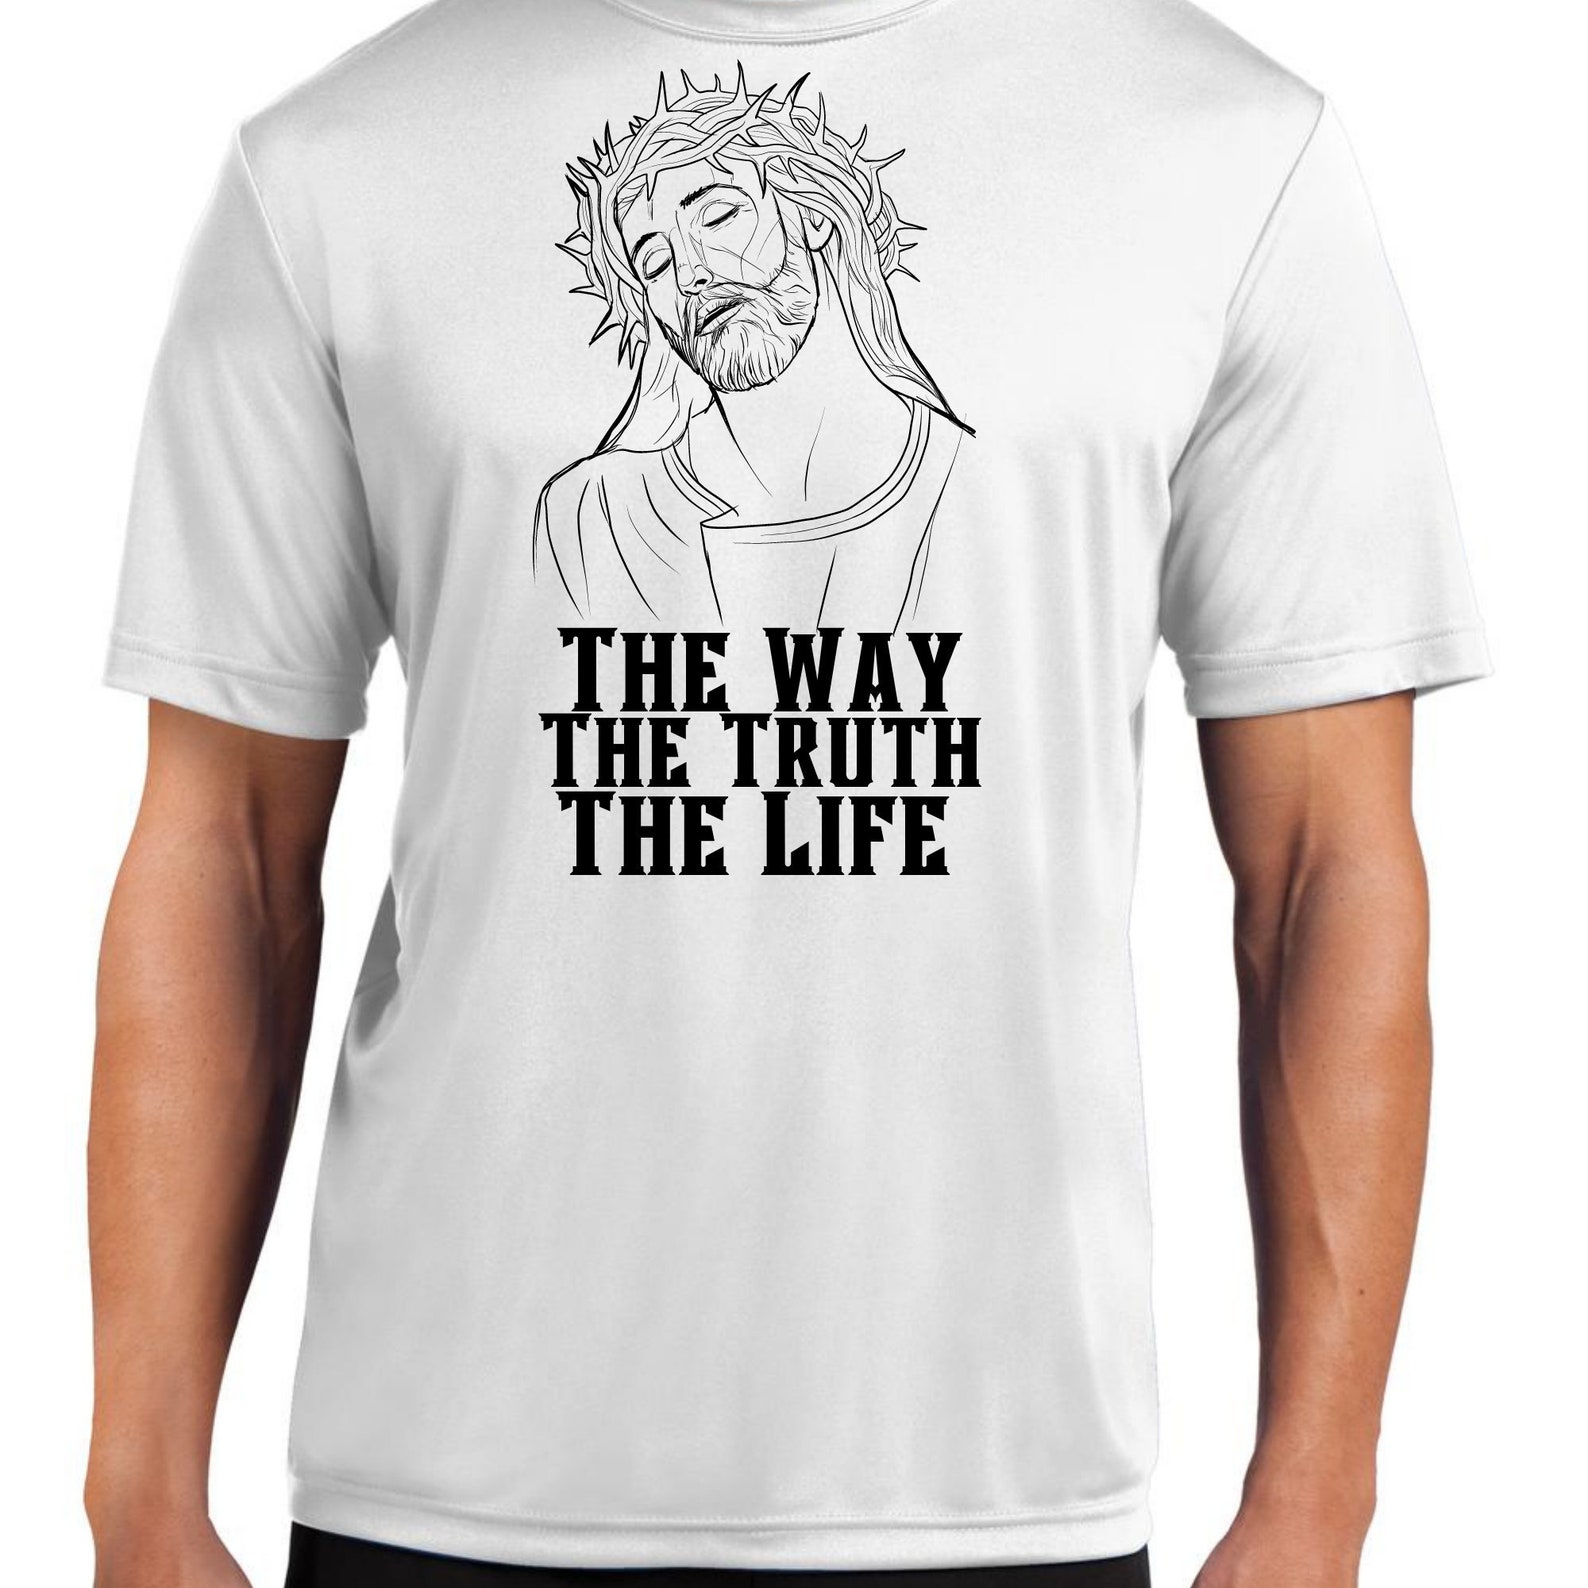 The Way The Truth The Life on front of T-Shirt With Be Wise | Etsy